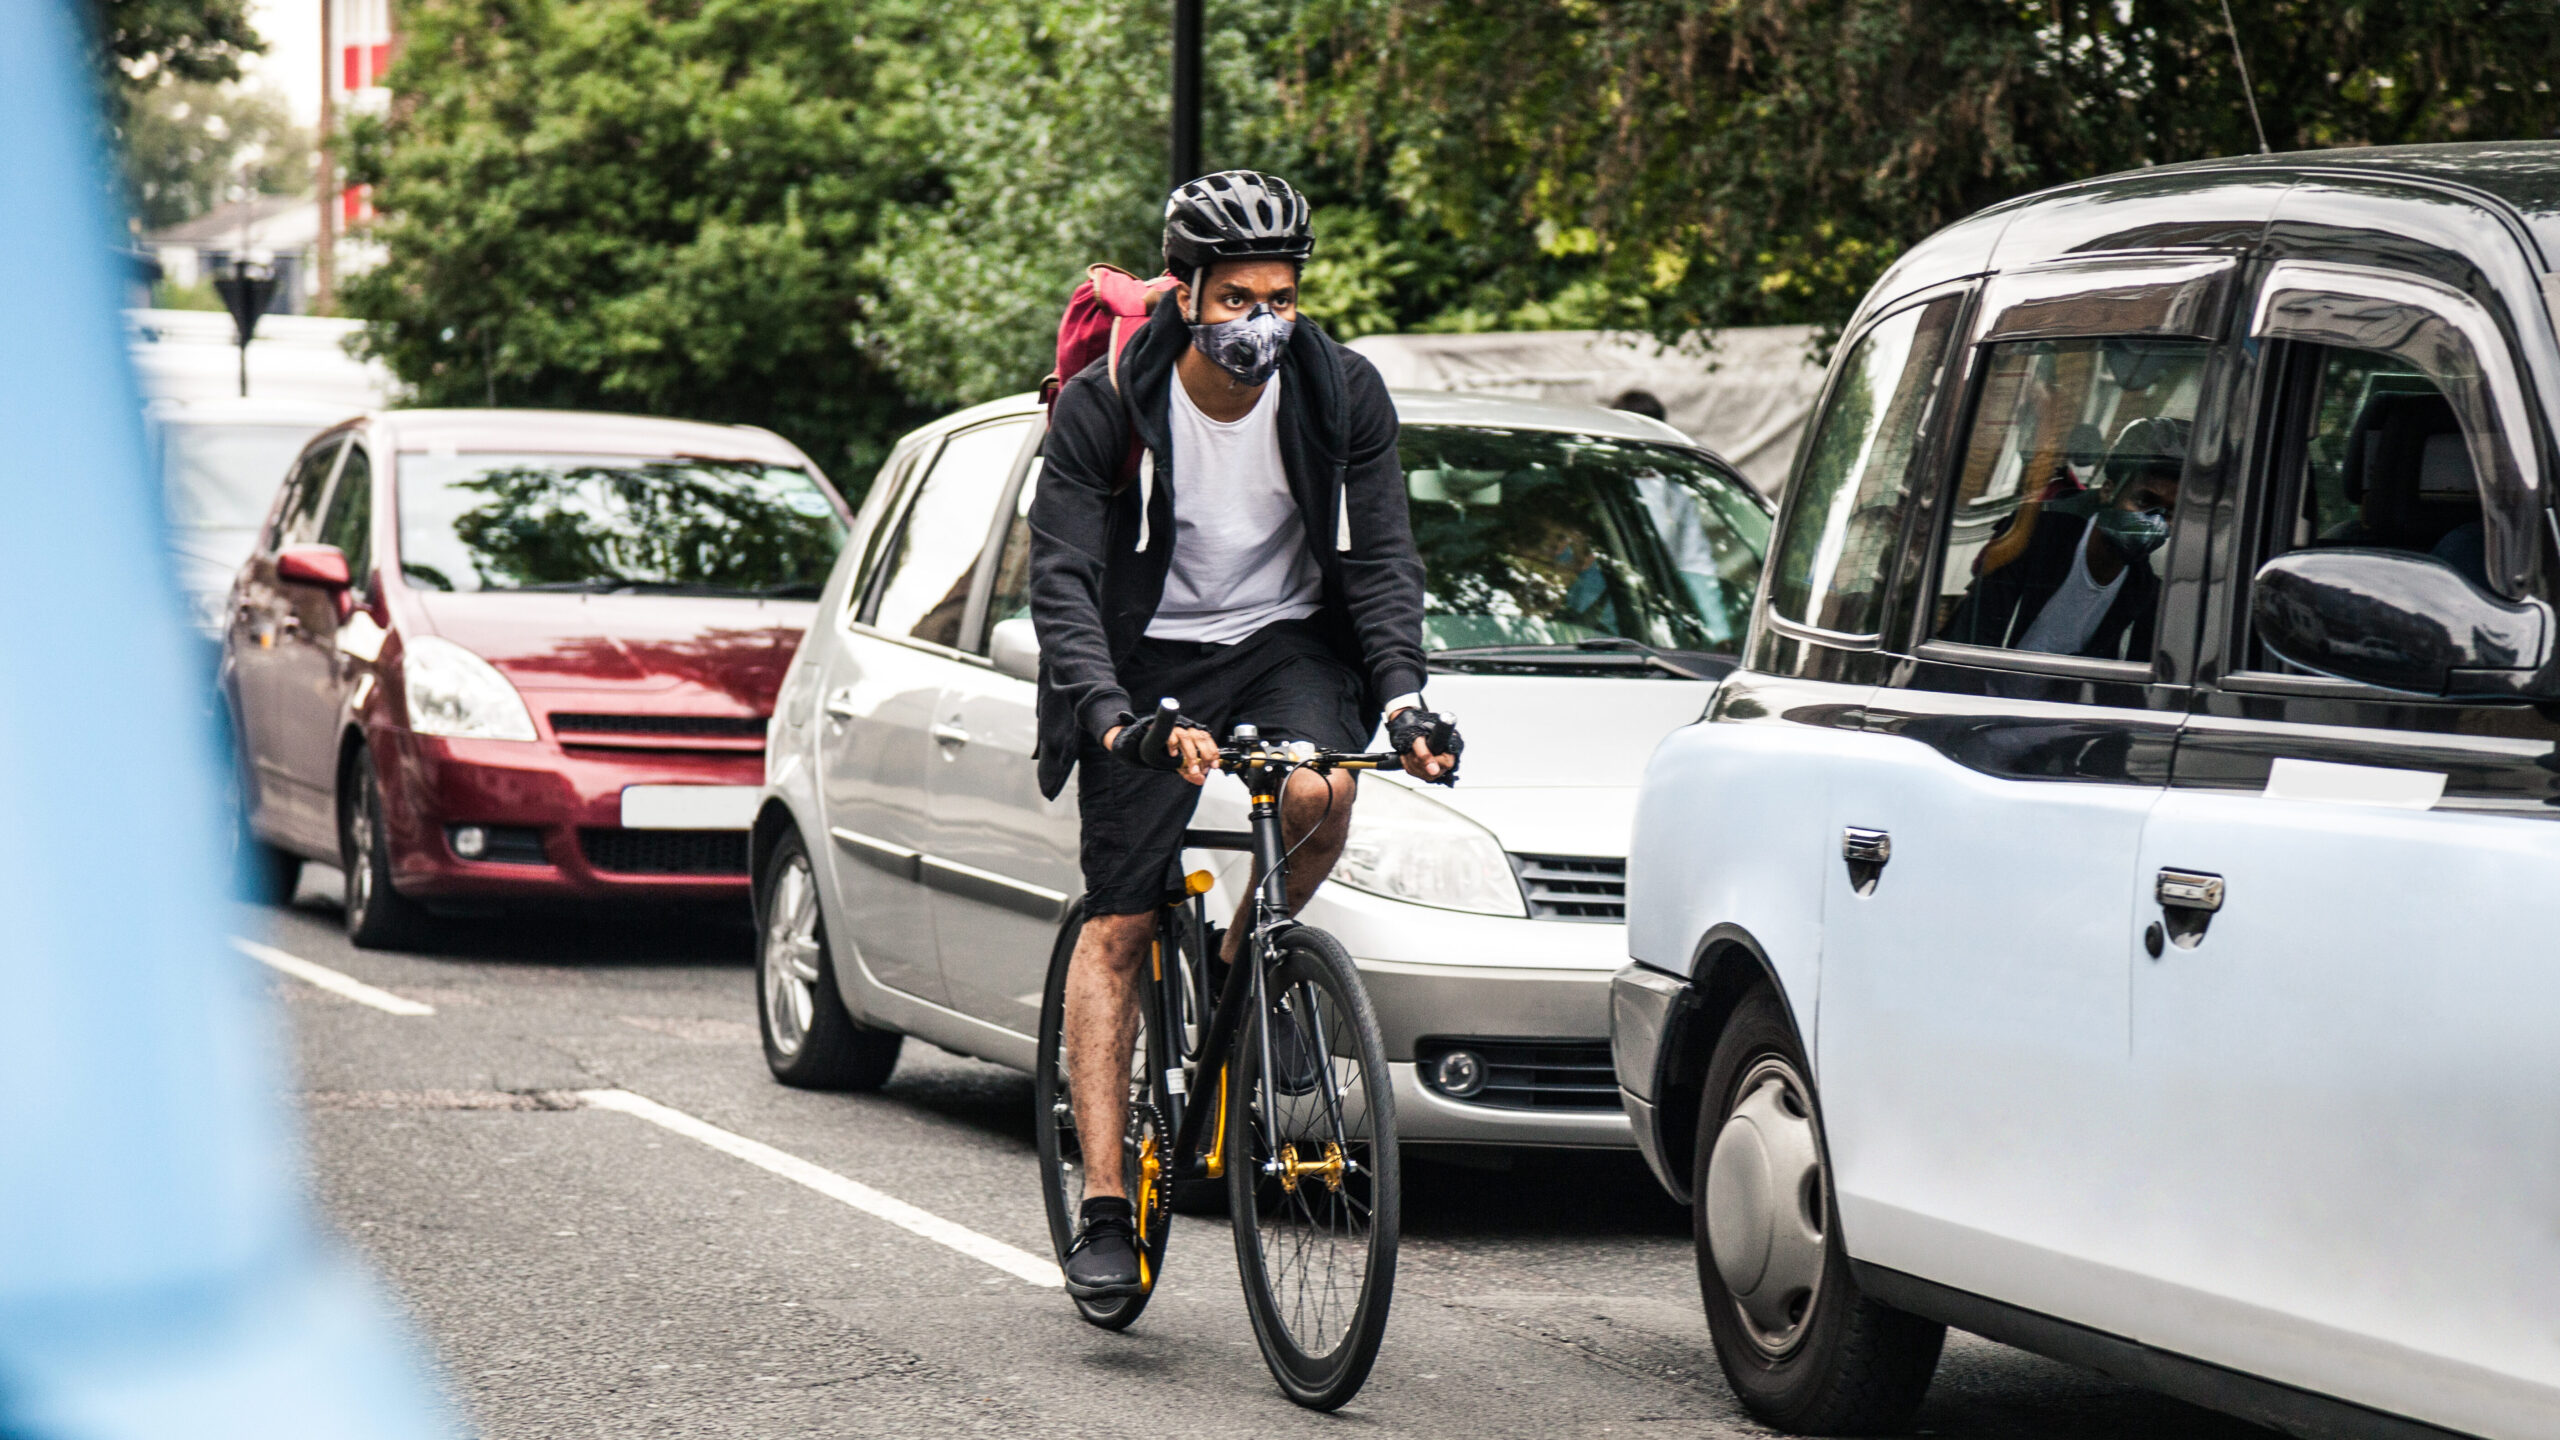 A man cycling on a road congested with cars. The man is wearing a lower face mask for better air ventilation.